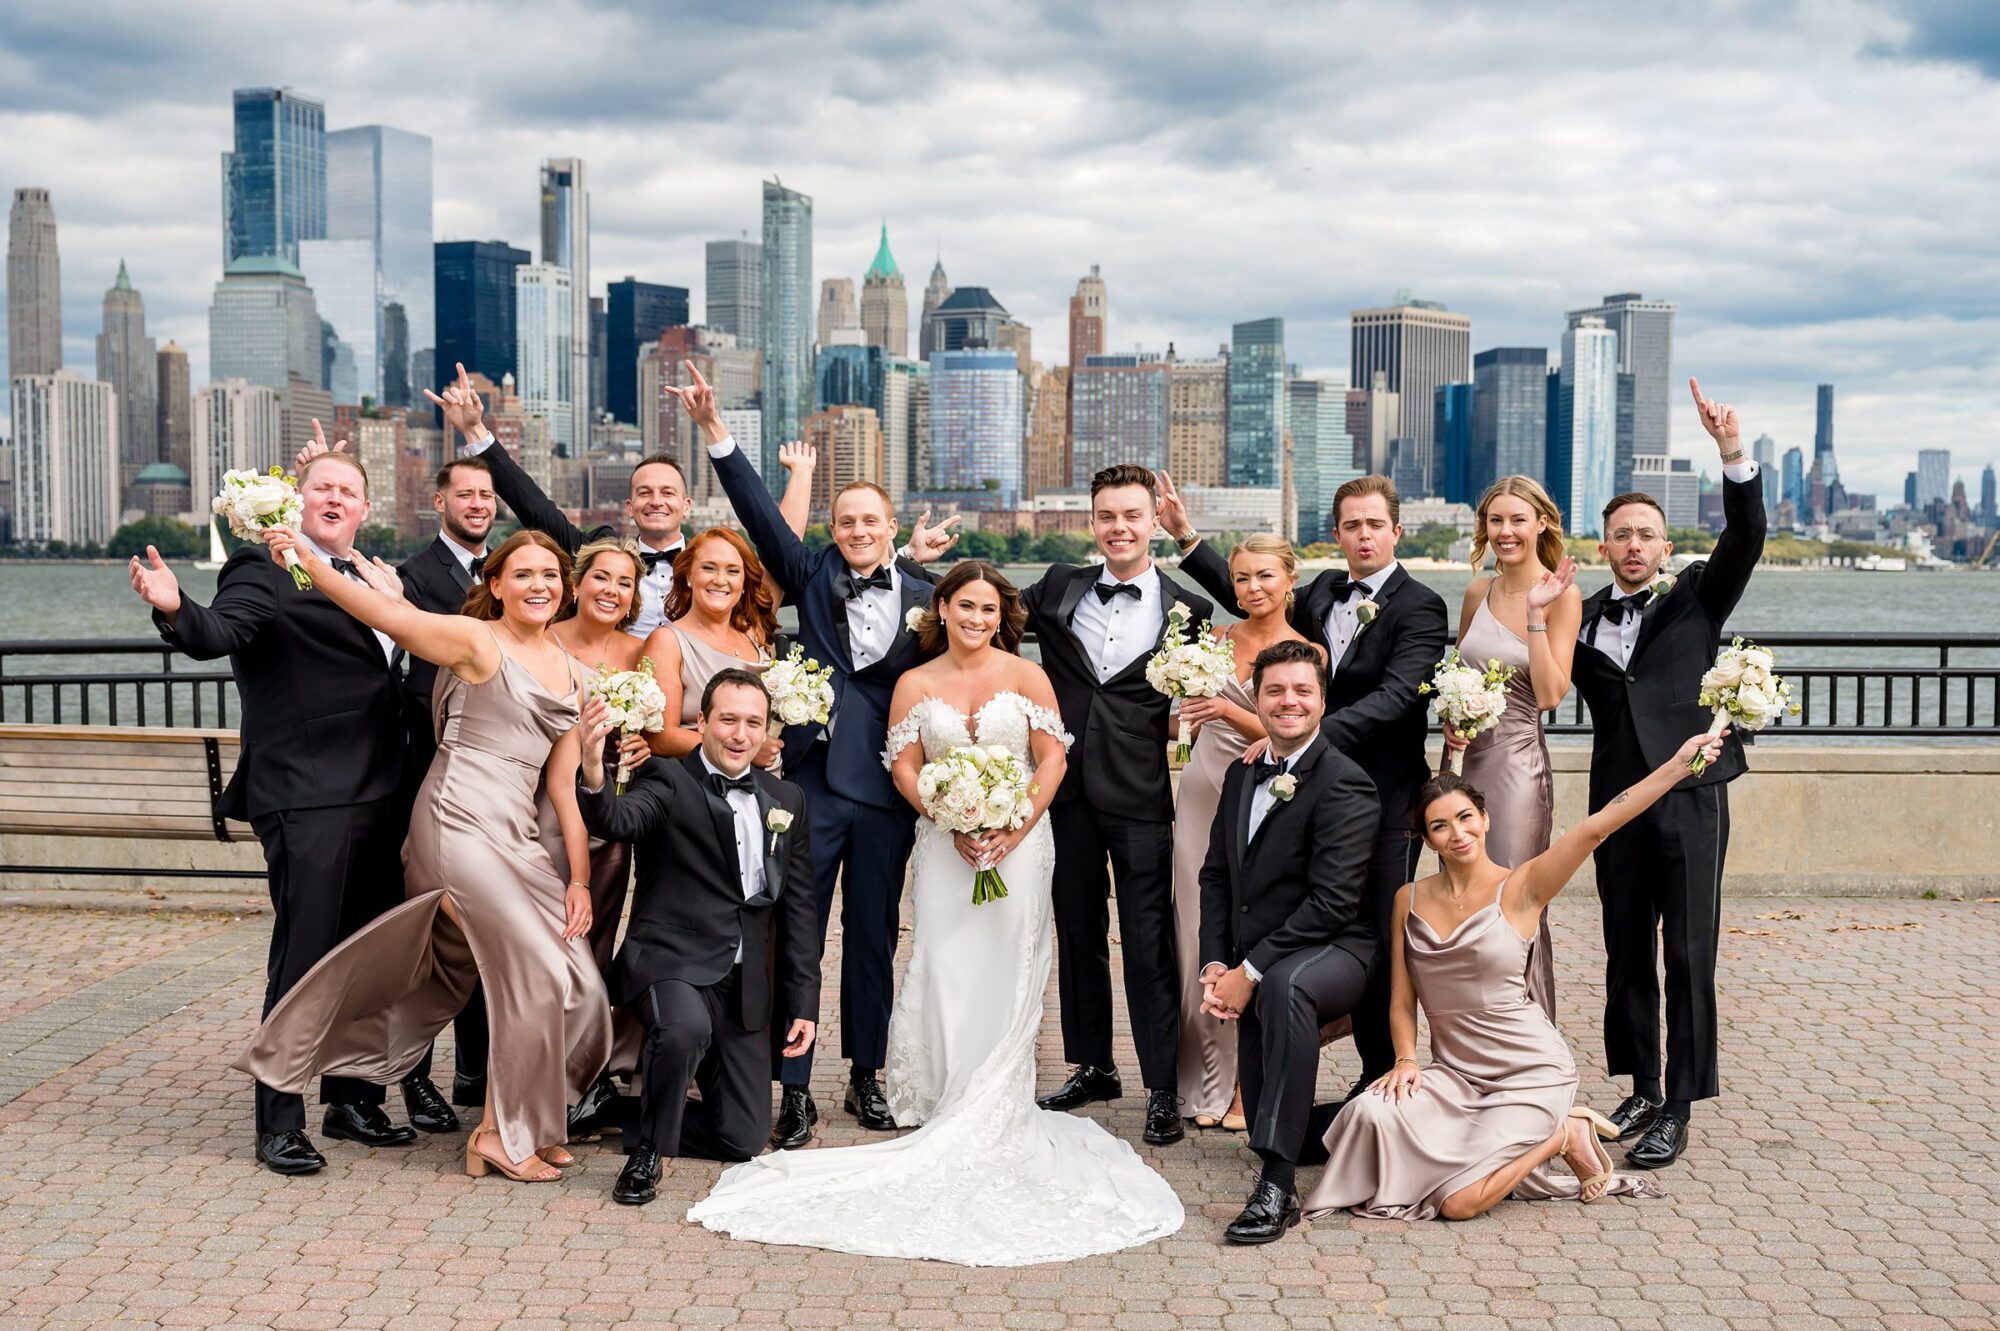 A wedding party poses in front of the manhattan skyline.